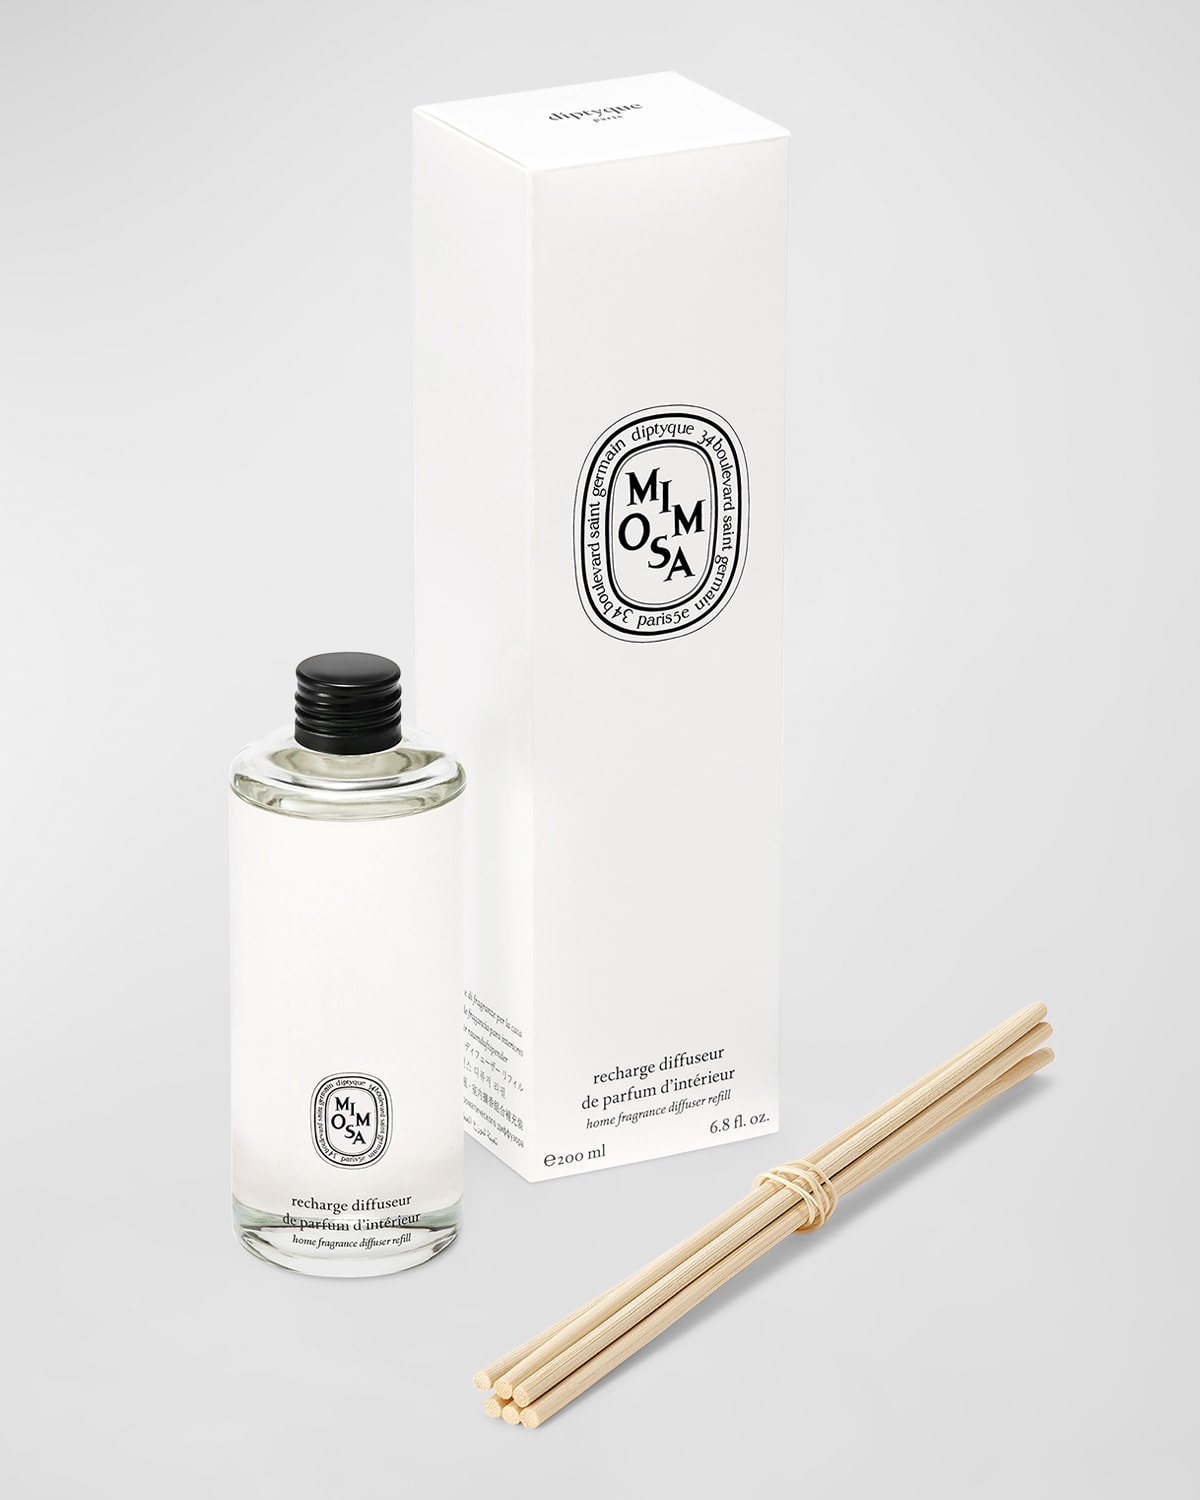 DIPTYQUE MIMOSA REED DIFFUSER REFILL, 6.8 OZ.